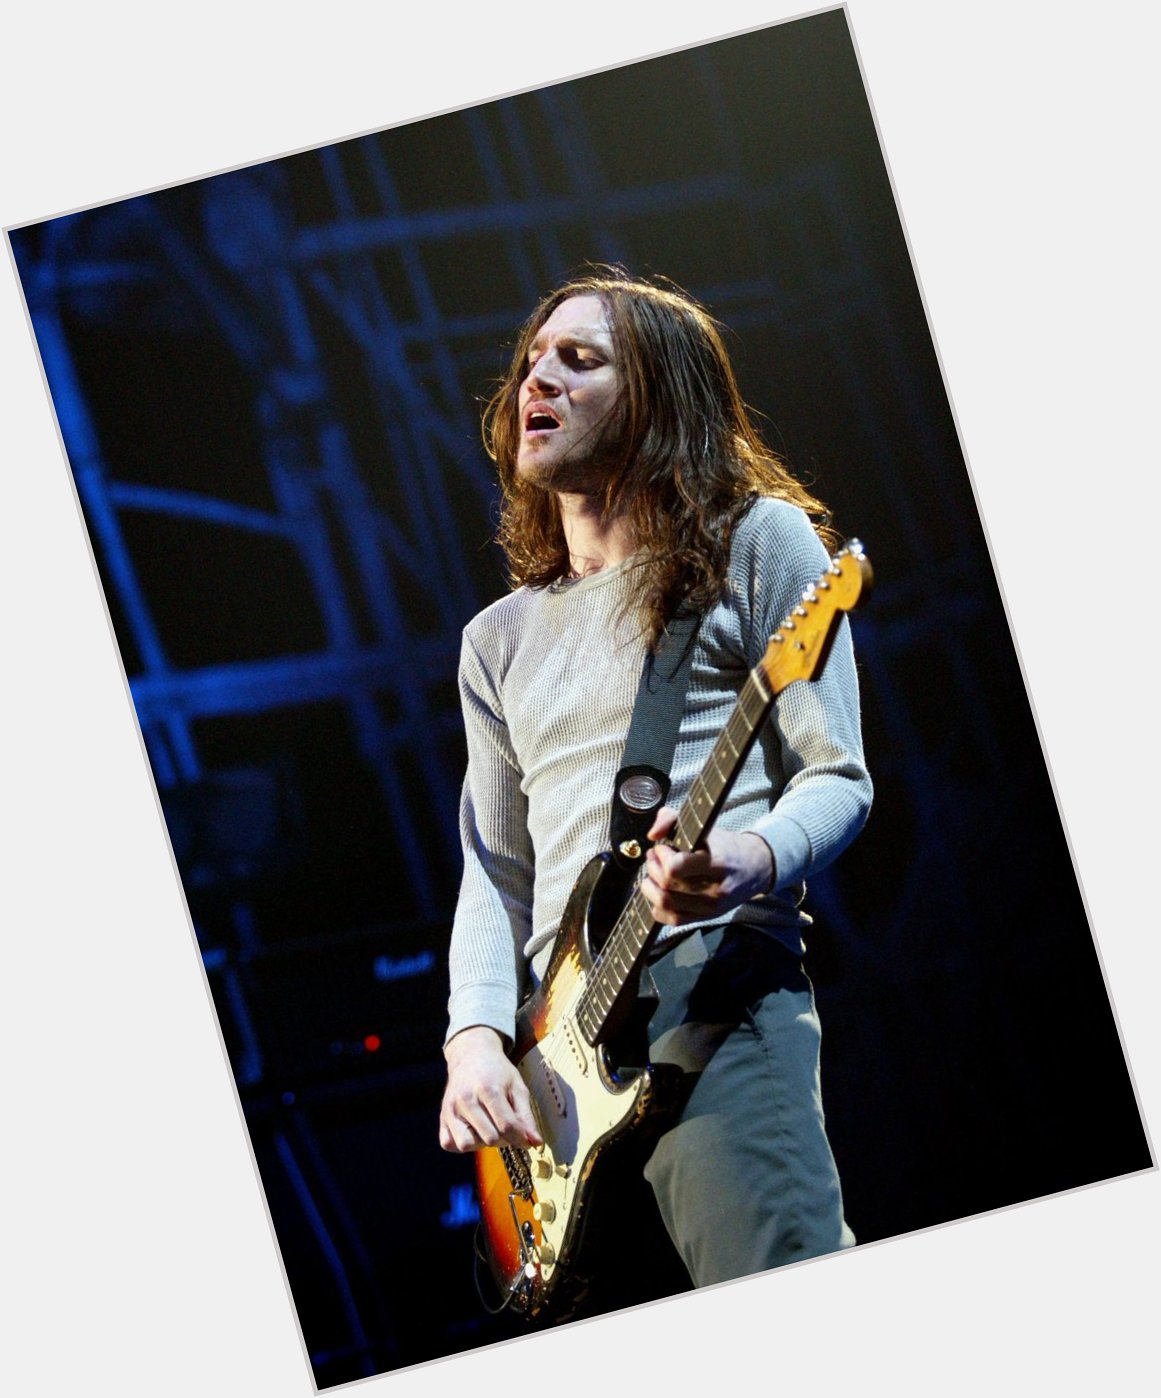 Happy birthday to guitarist John Frusciante formerly of the once great RHCP. 